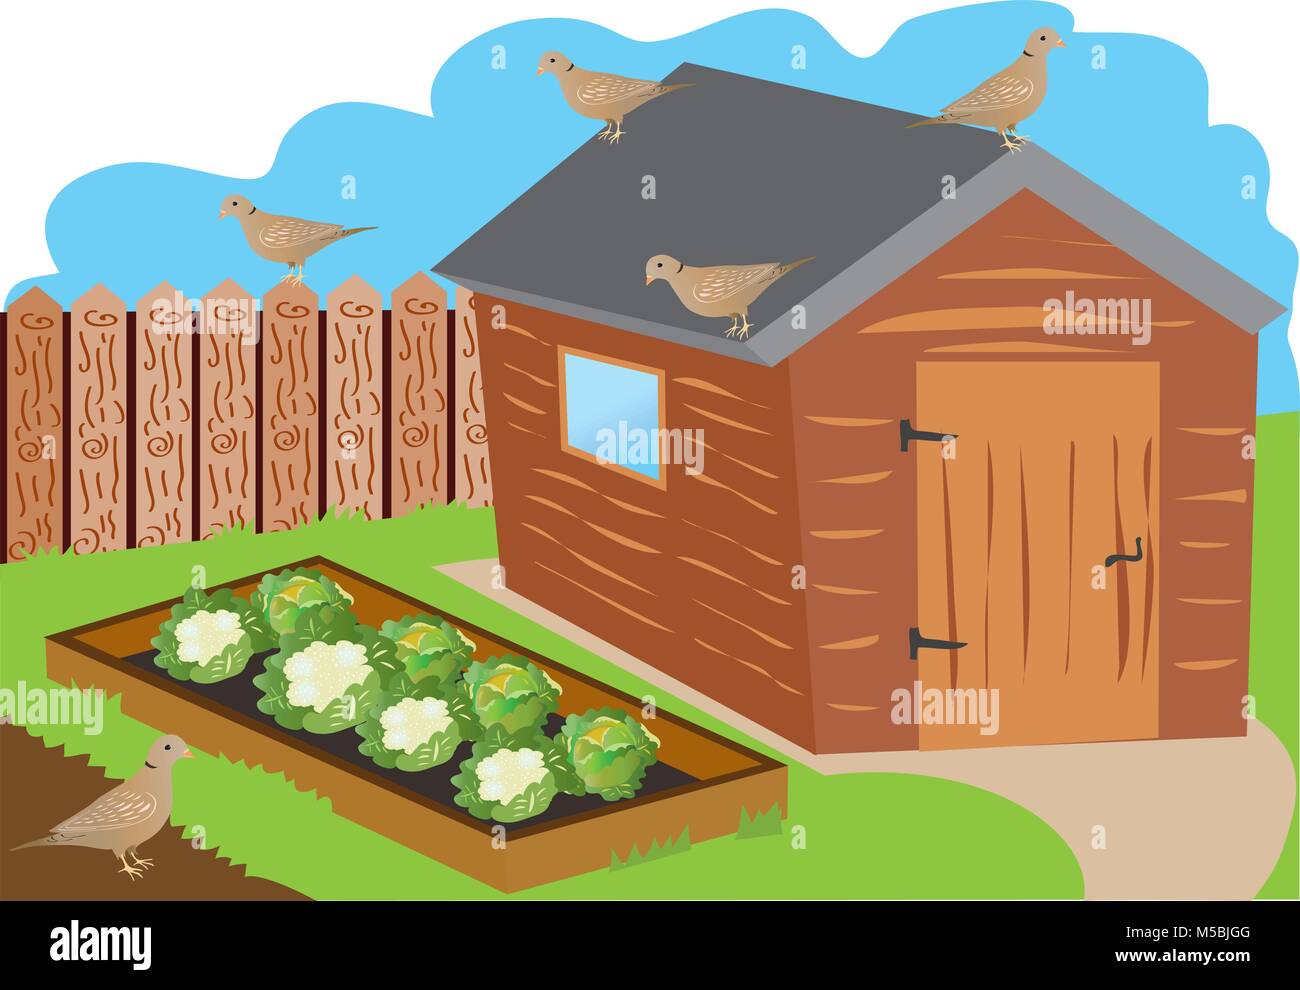 An illustration of a fenced allotment garden with shed,raised vegetable beds with cabbages and cauliflowers and several collared doves Stock Vector